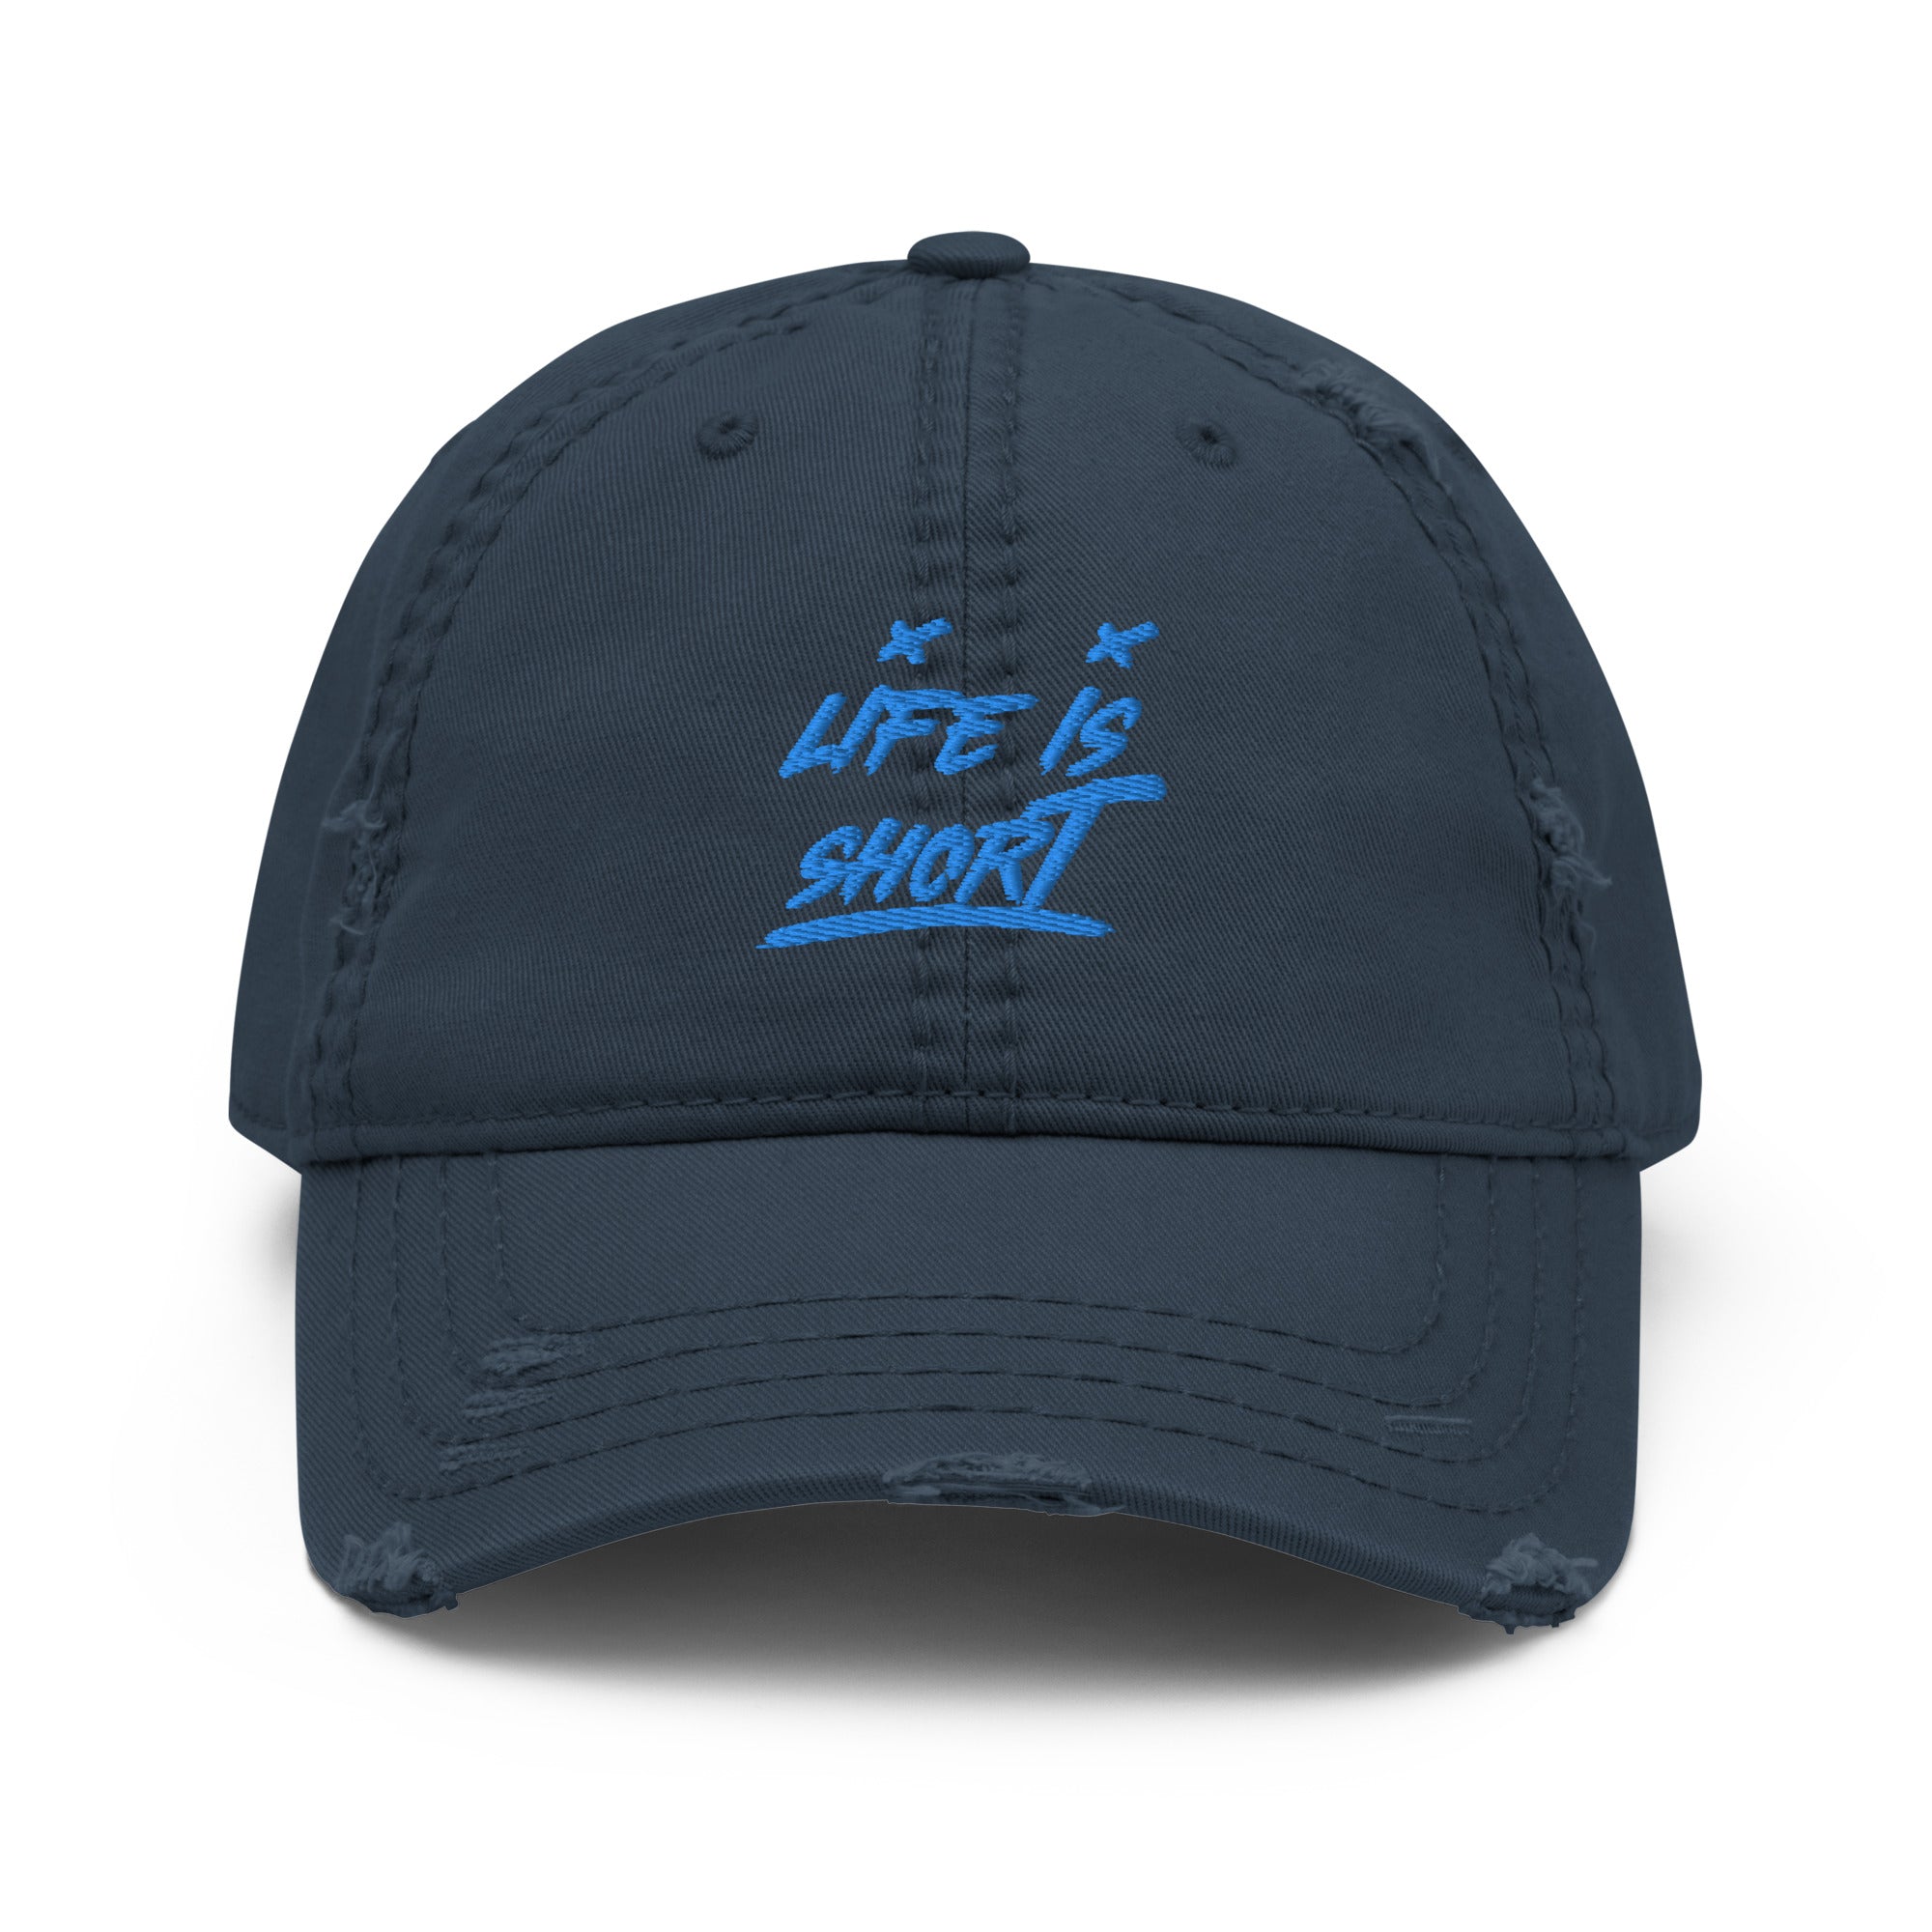 Life Is Short Distressed Dad Hat